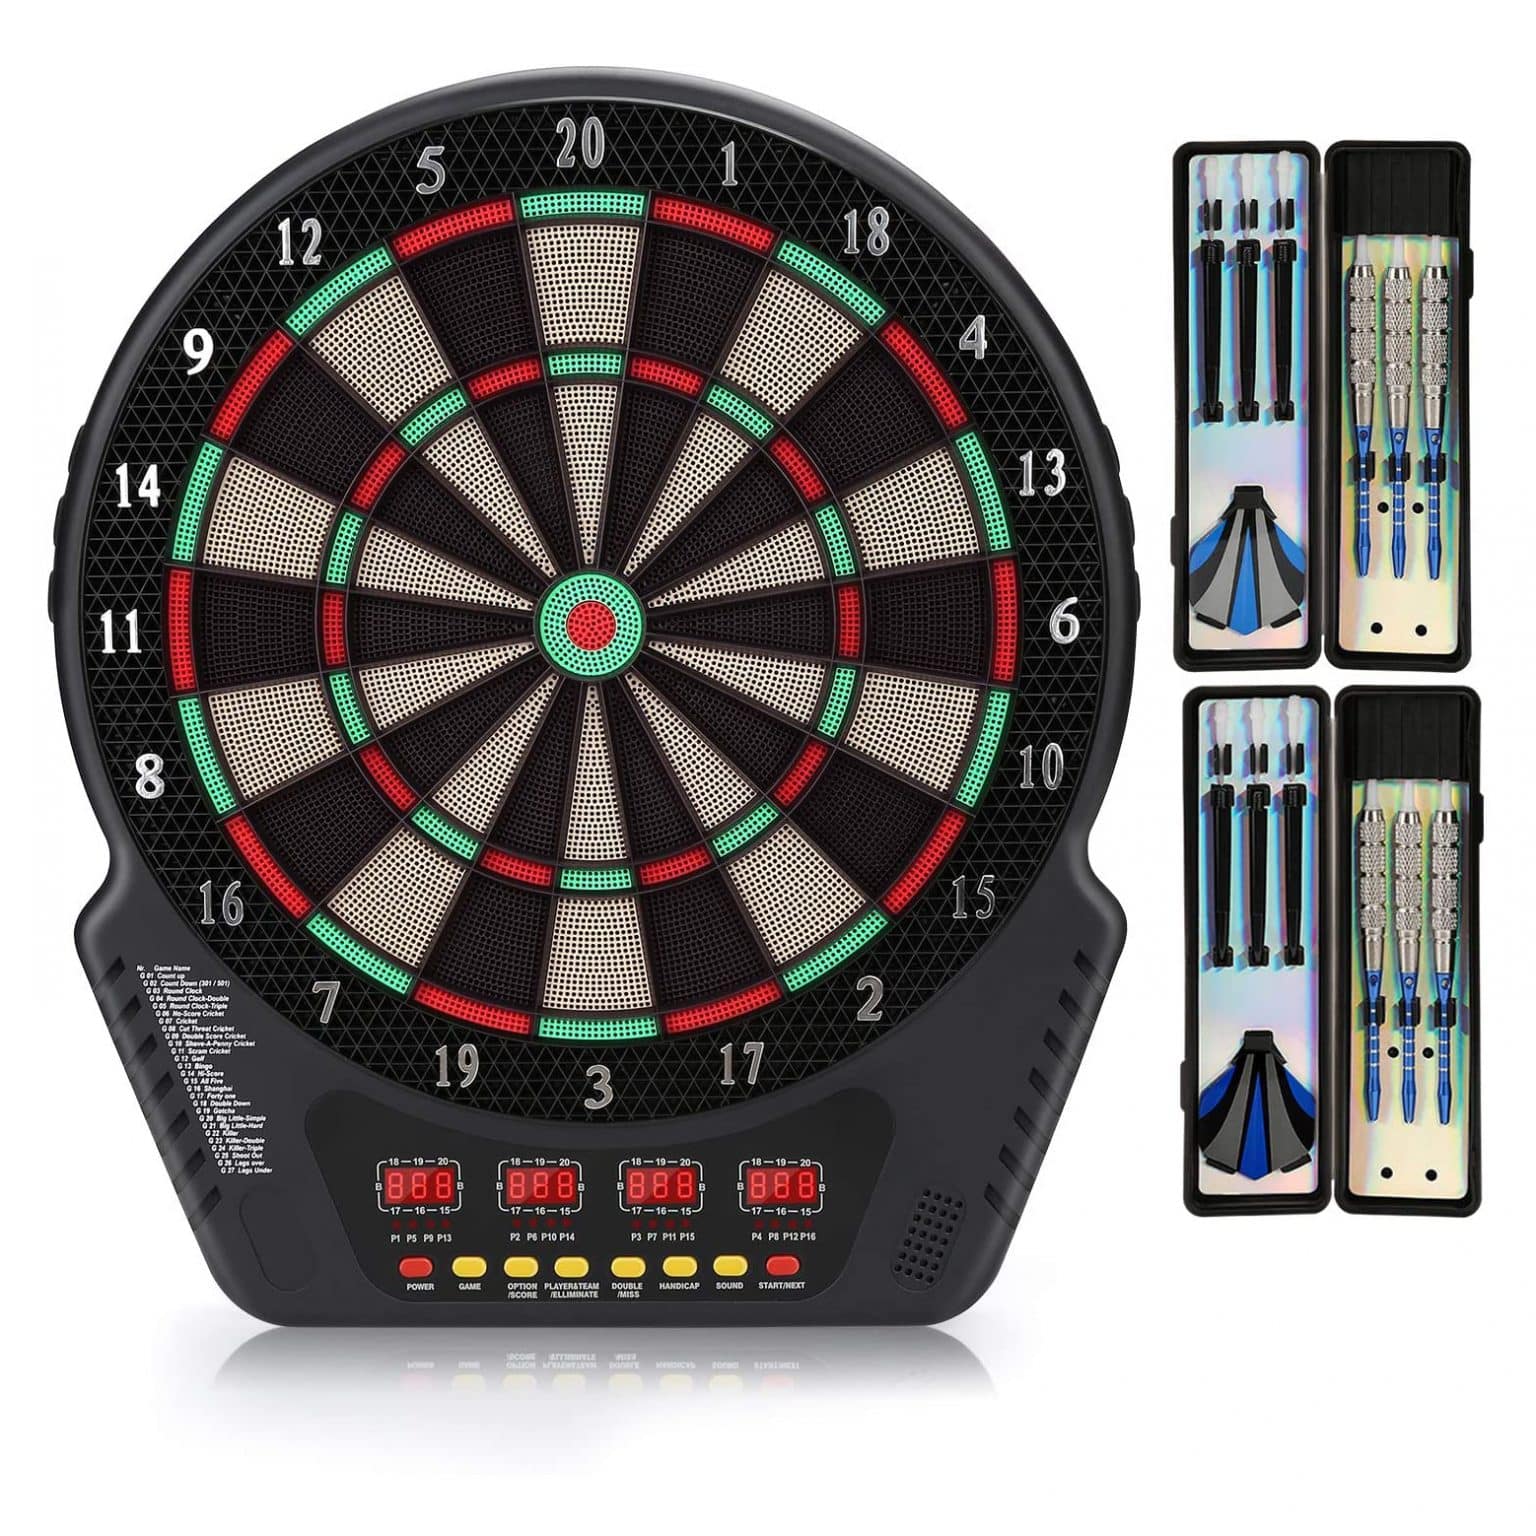 Top 10 Best Electronic Dart Boards in 2023 Reviews Buyer's Guide